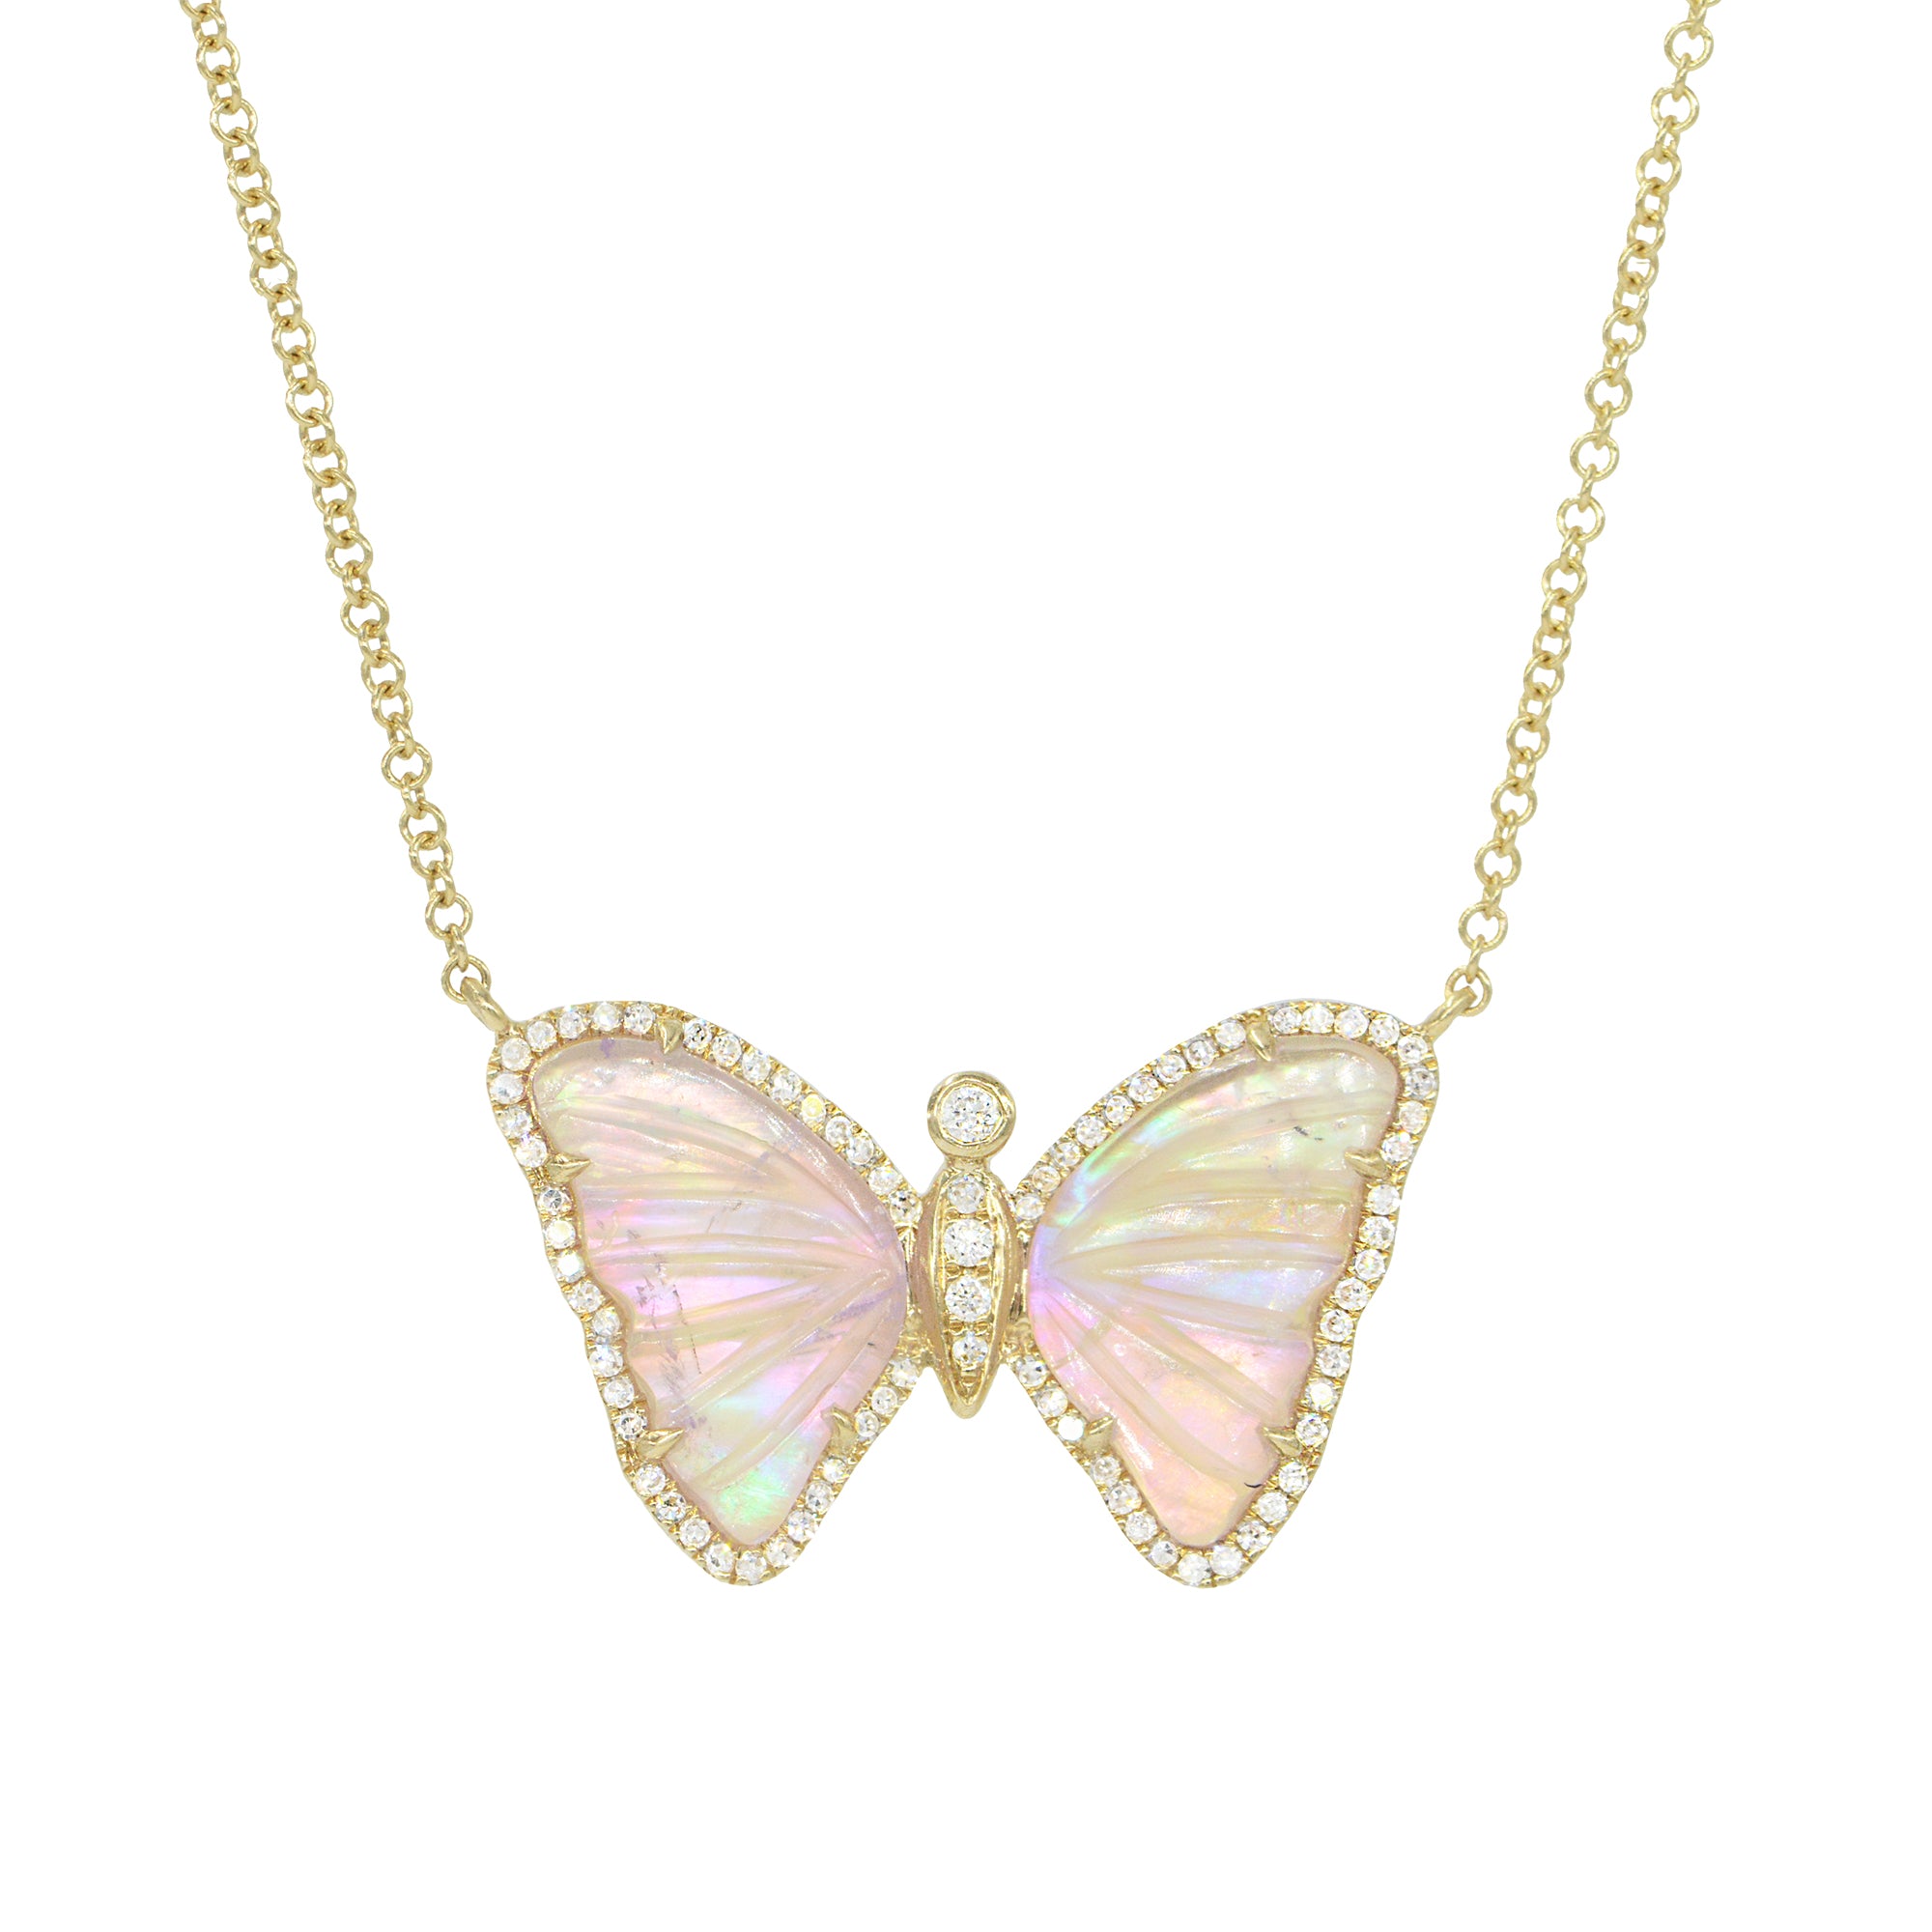 white topaz and pink pearl doublet butterfly necklace with diamonds